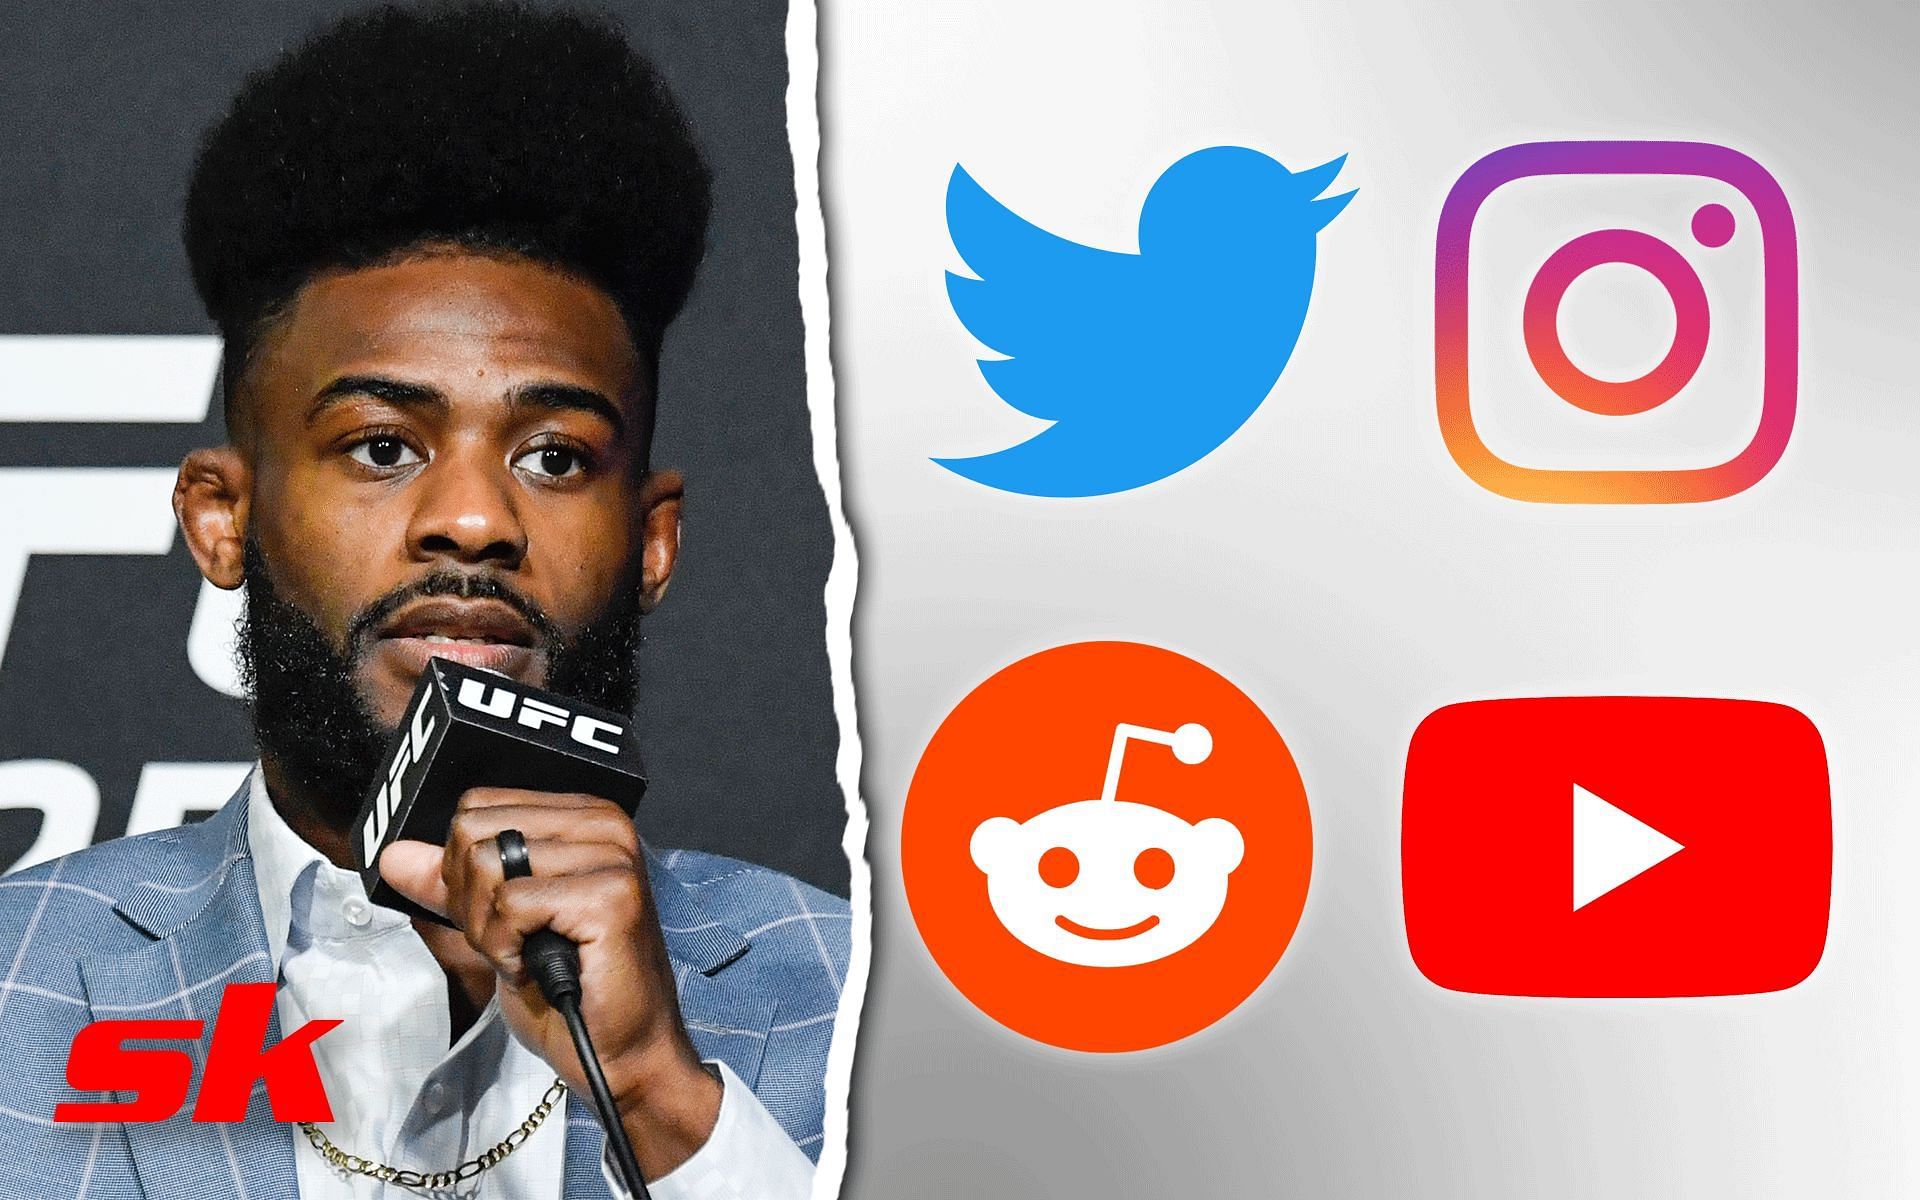 Aljamain Sterling. [Images courtesy: left image from Getty Images and right images from respective official Instagram accounts]